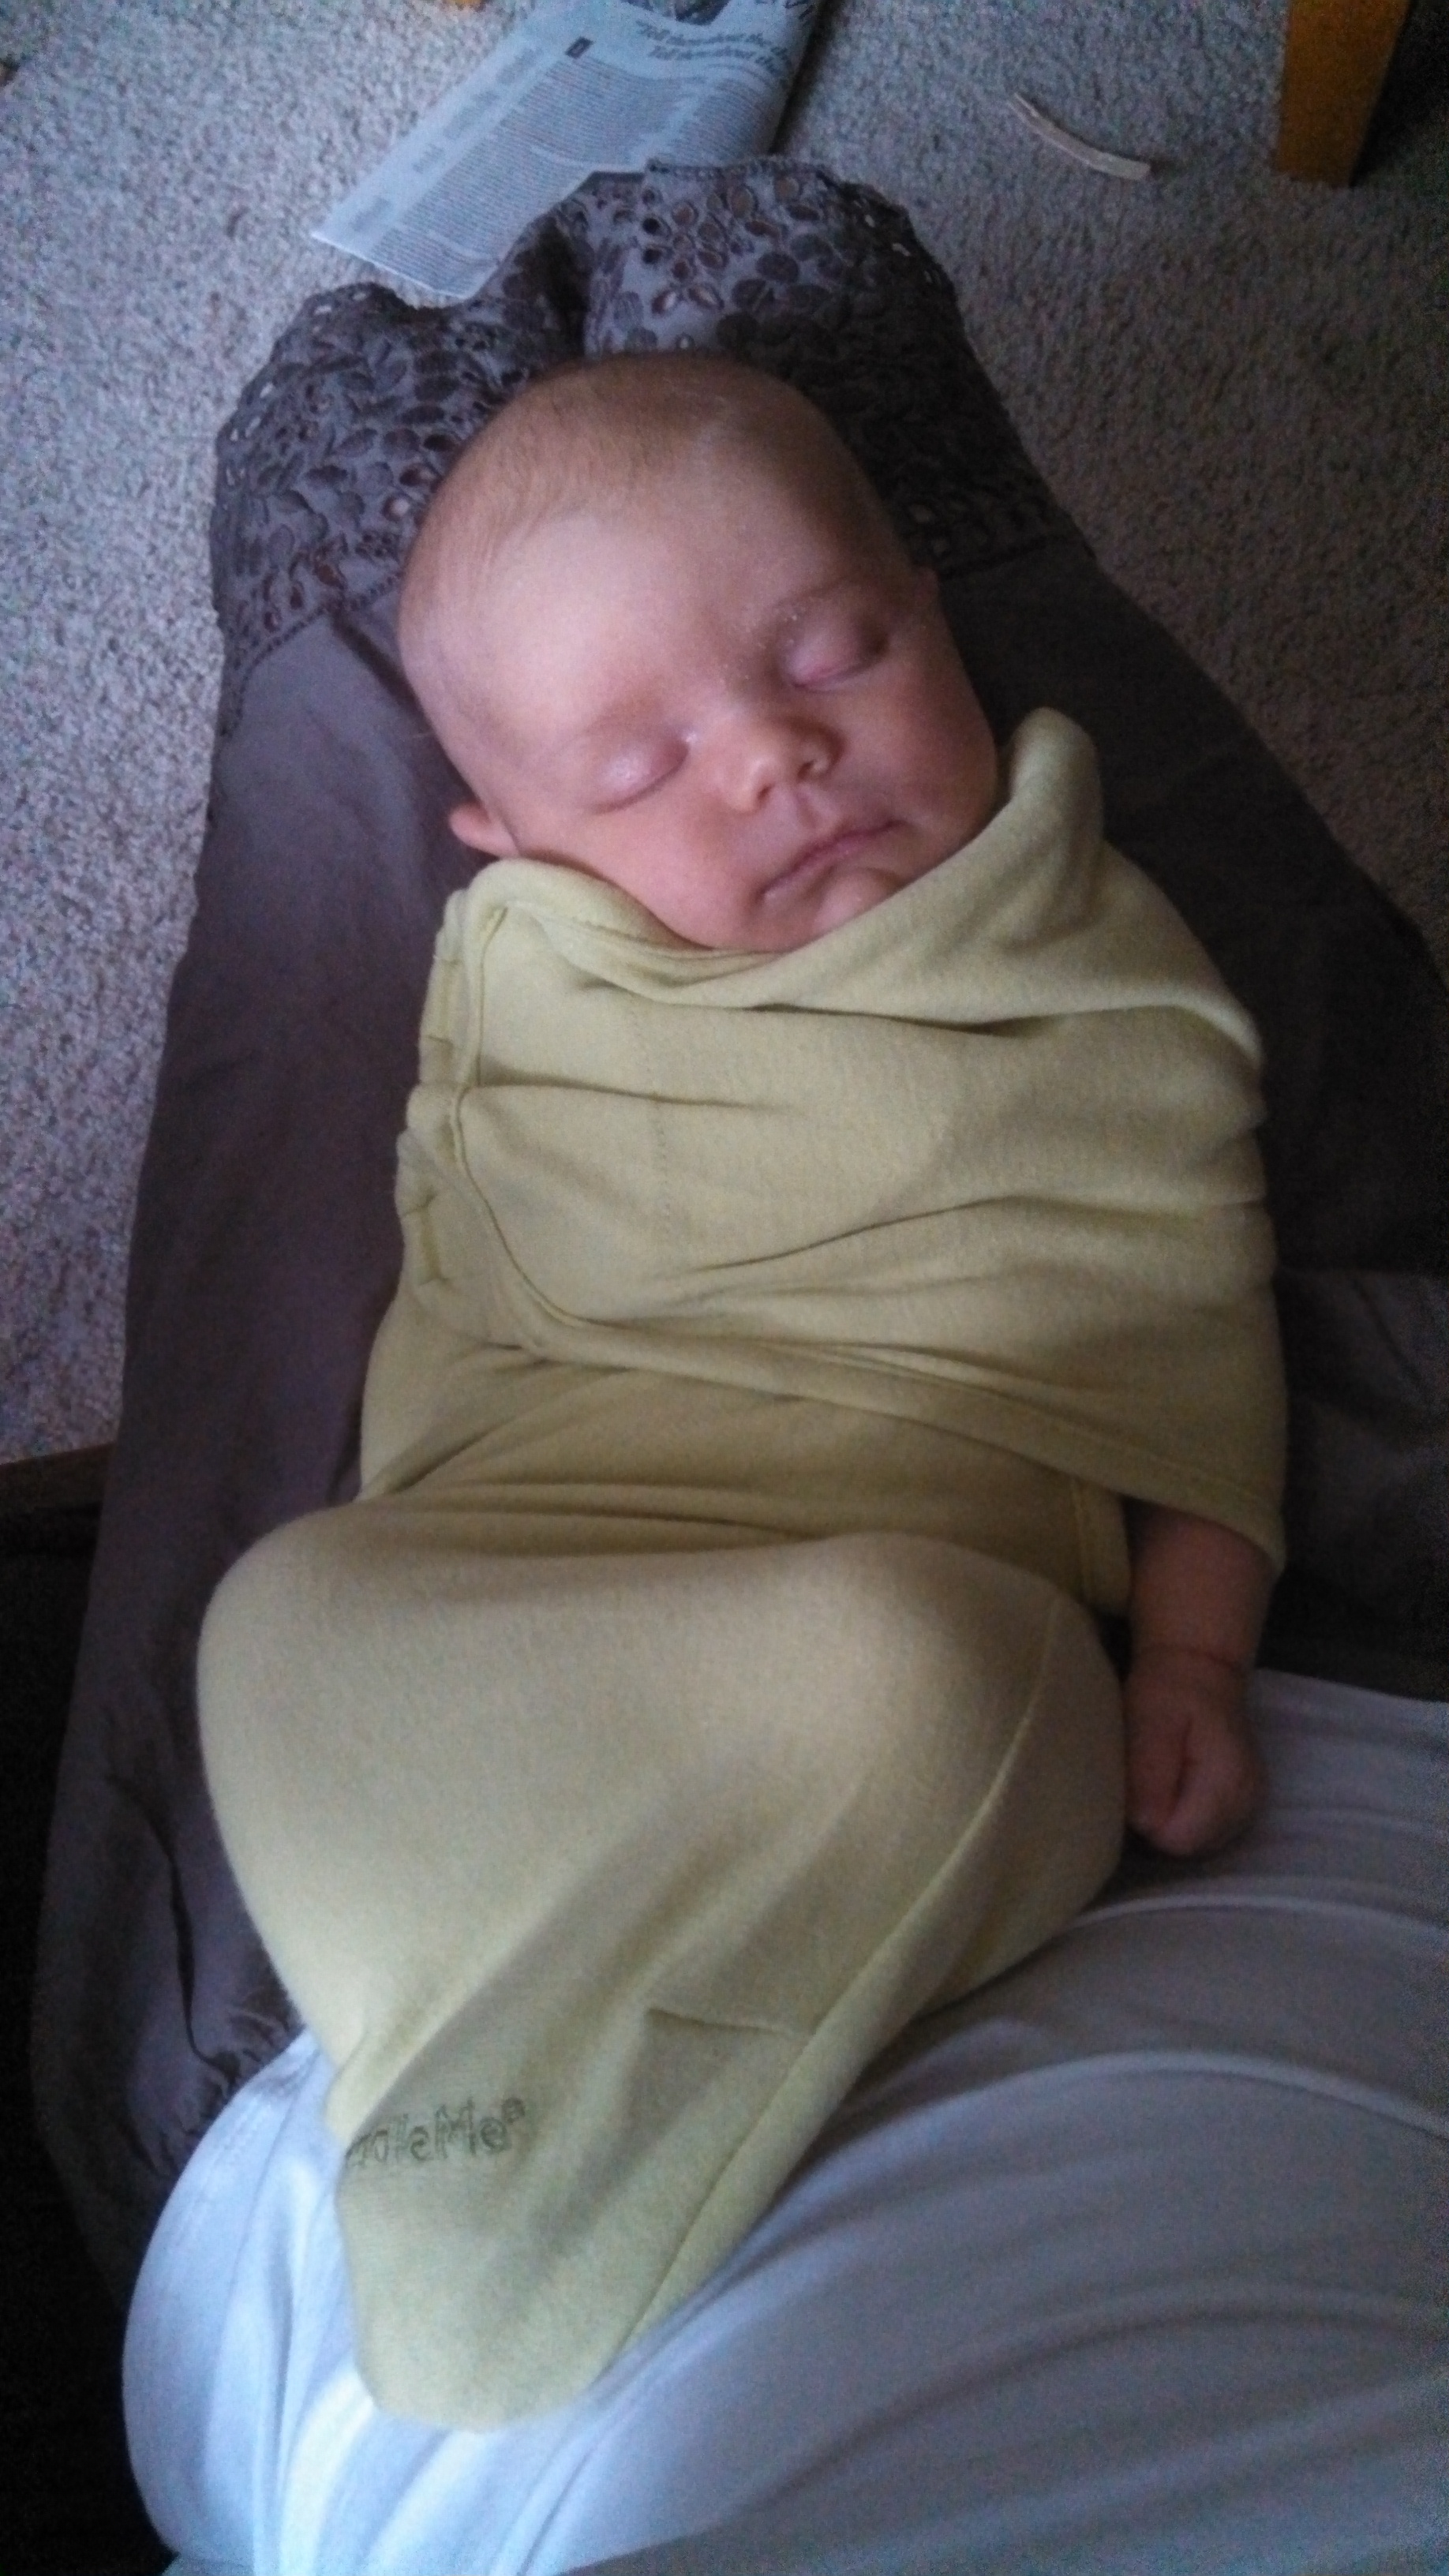 Our tiny caterpillar is expert at sneaking an arm out of her snuggly swaddler. 